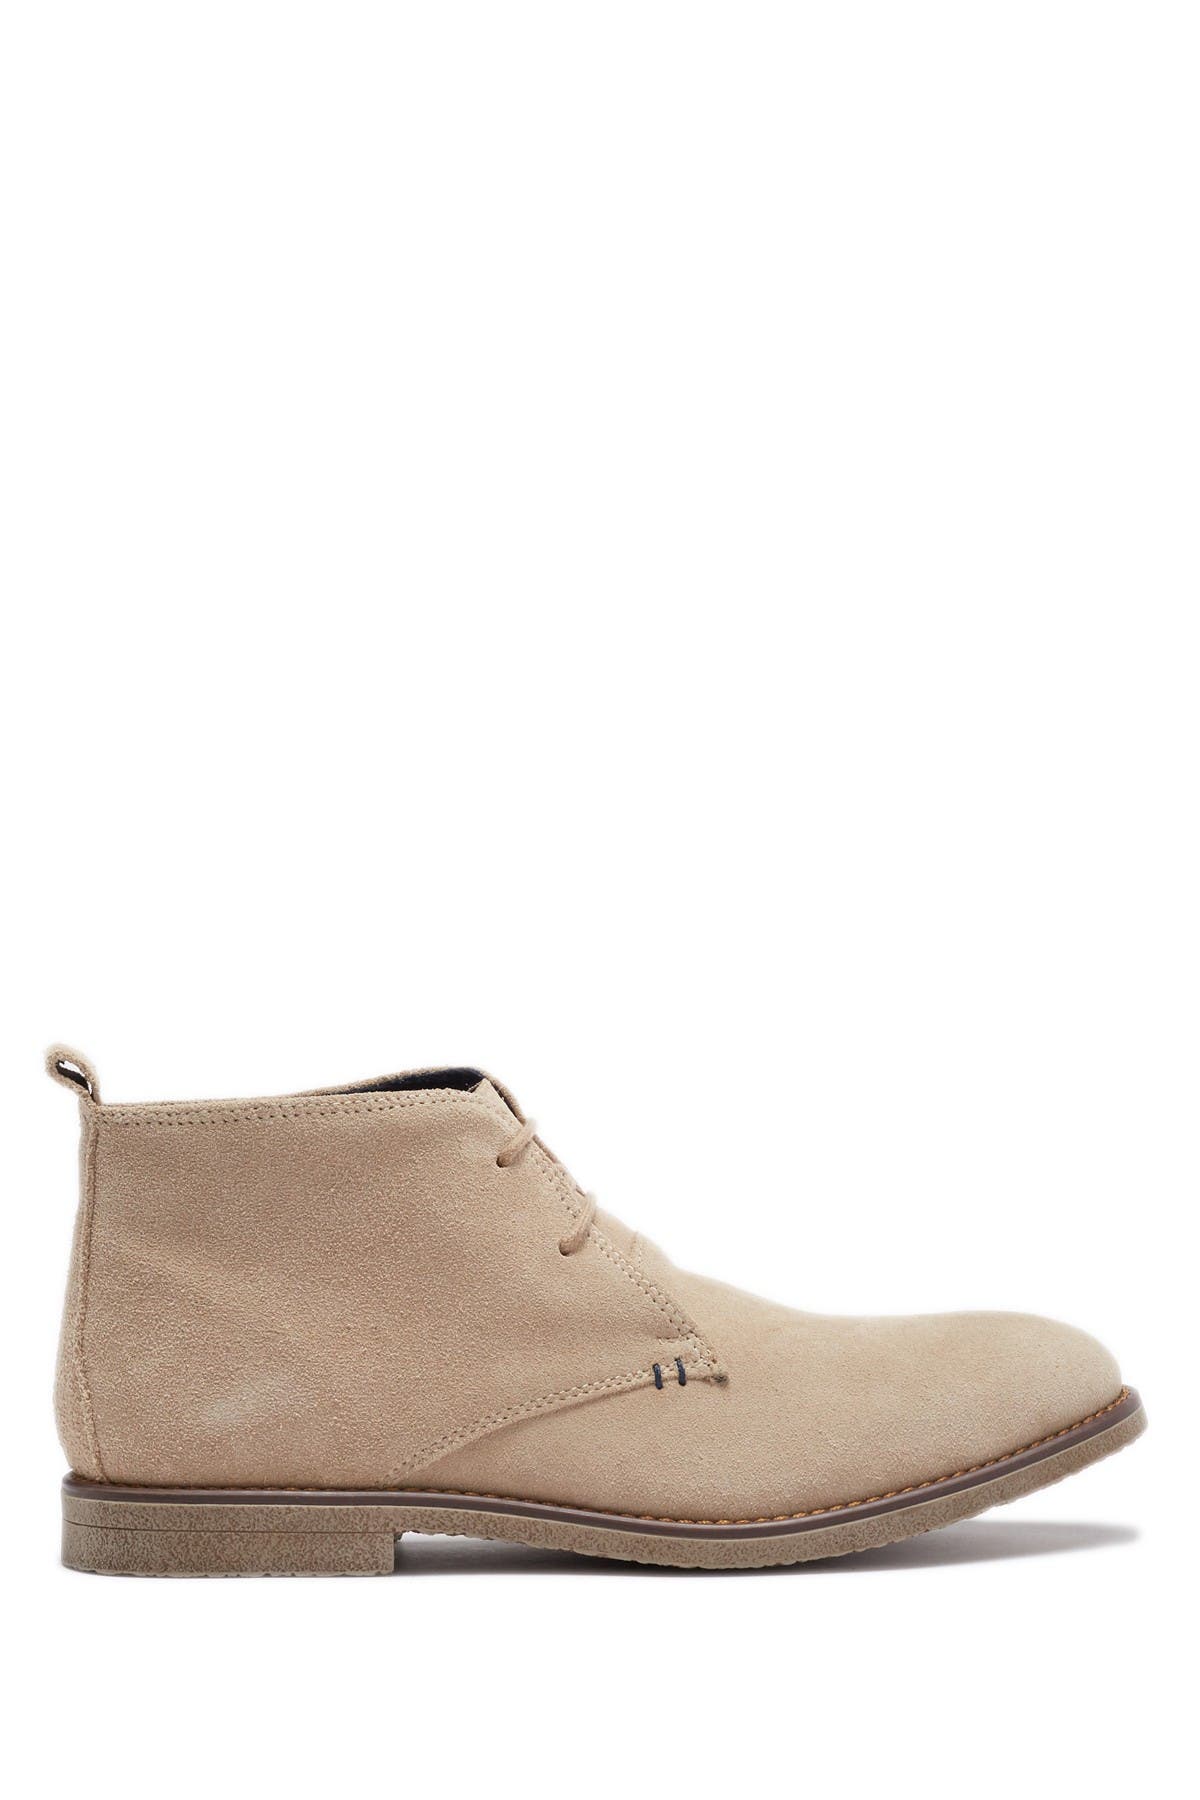 joseph abboud lucca suede chukka boot